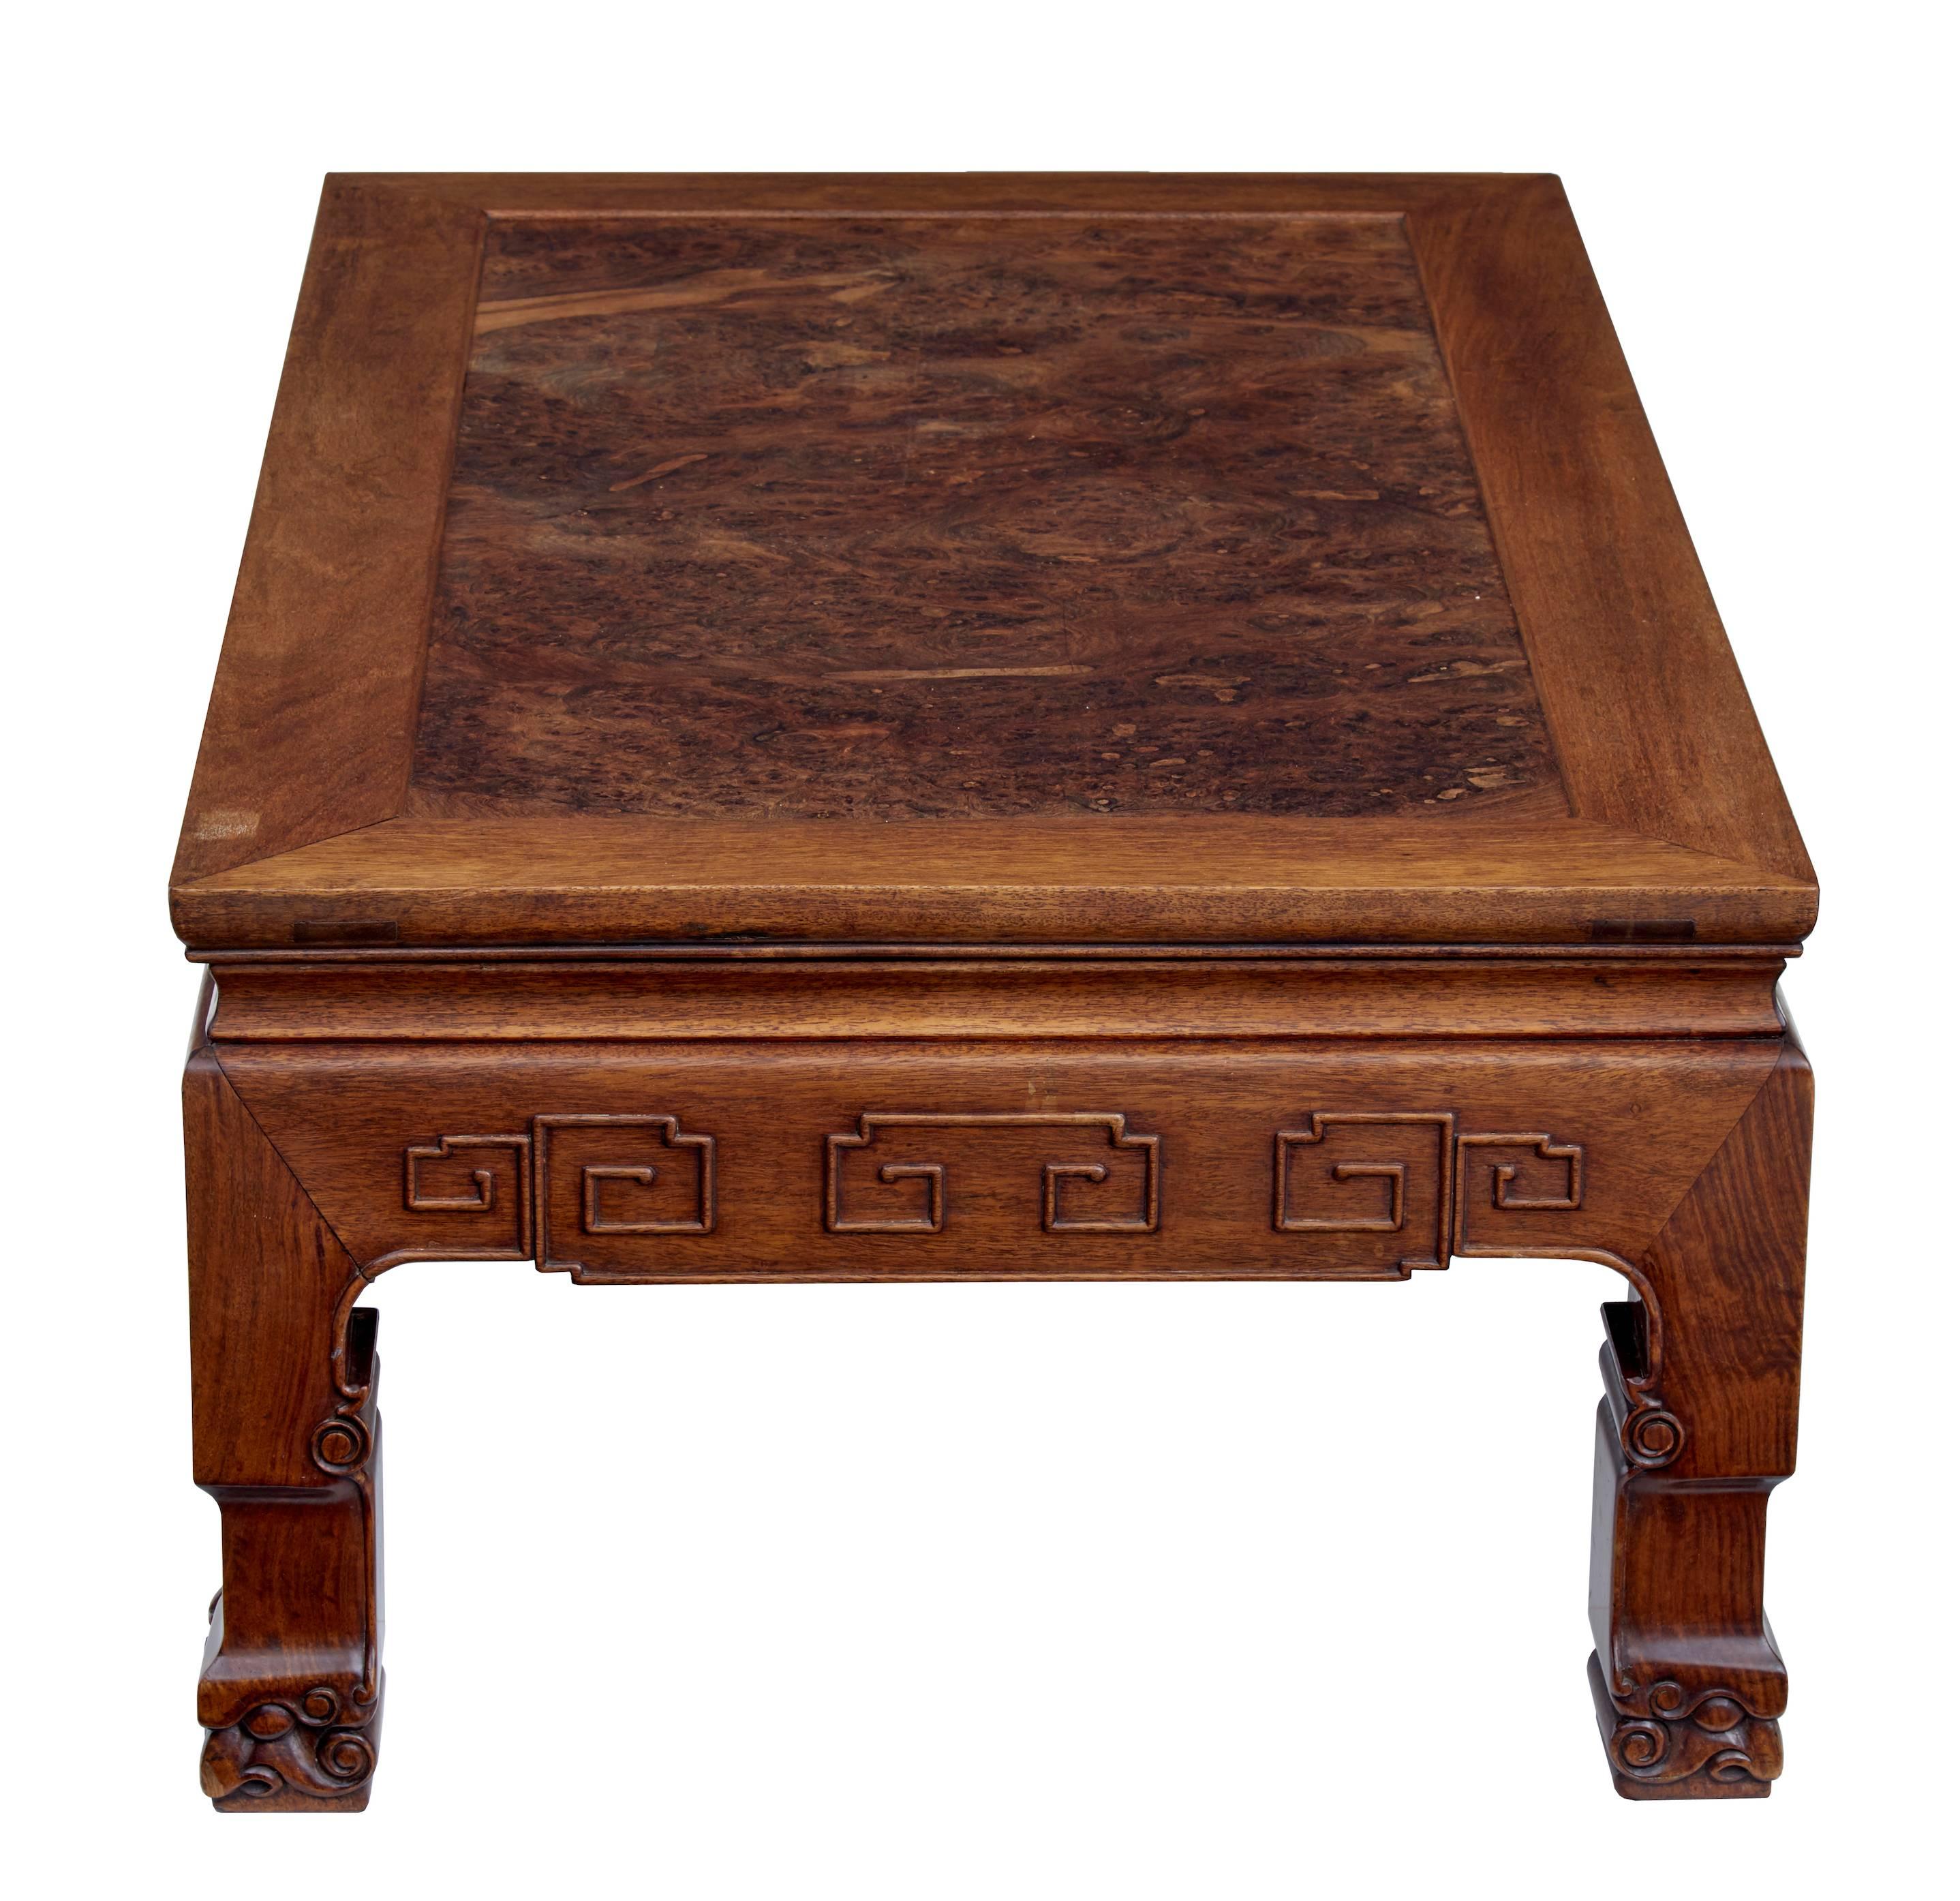 Good quality heavy low kang table, circa 1900. Made from Huanghuali with burr wood insert. Carved decoration to sides. Standing on four carved scrolling feet. Measures: Height 16